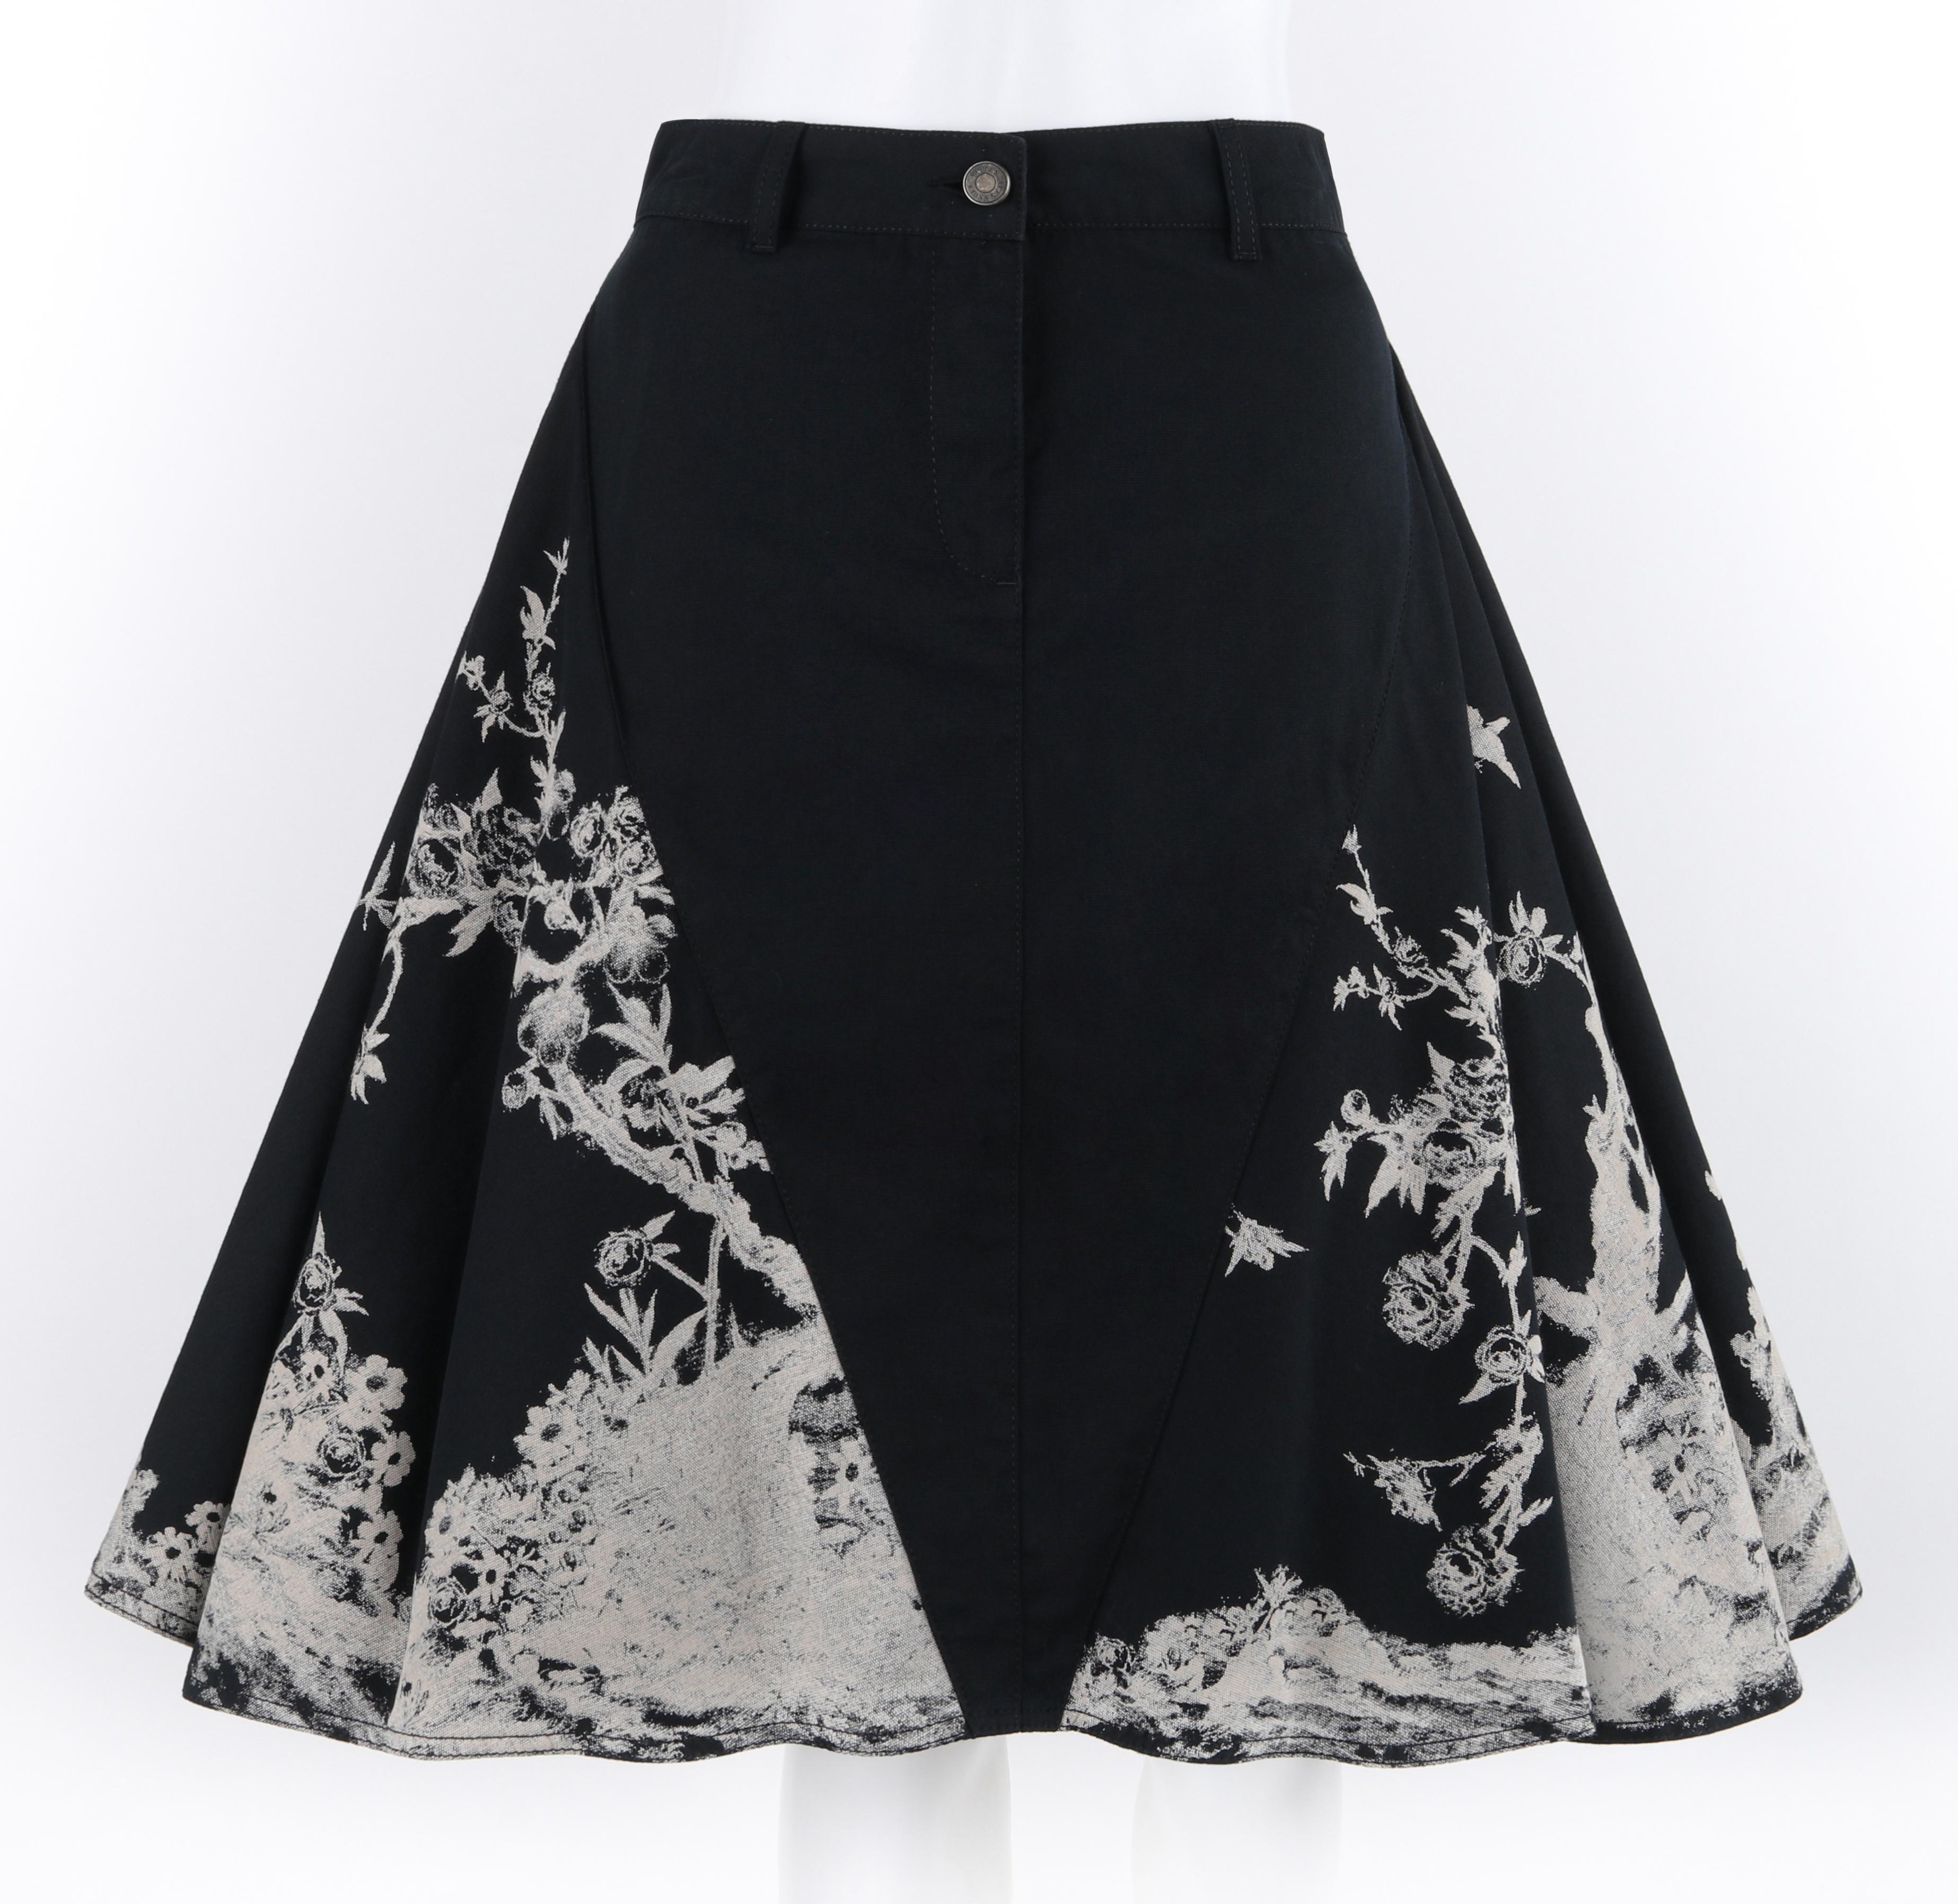 ALEXANDER McQUEEN A/W 2008 Black White Floral Peplum Illusion Circle Skirt

Brand / Manufacturer: Alexander McQueen
Collection: A/W 2008
Designer: Alexander McQueen
Style: Skirt
Color(s): Shades of black and white
Lined: No
Marked Fabric Content: